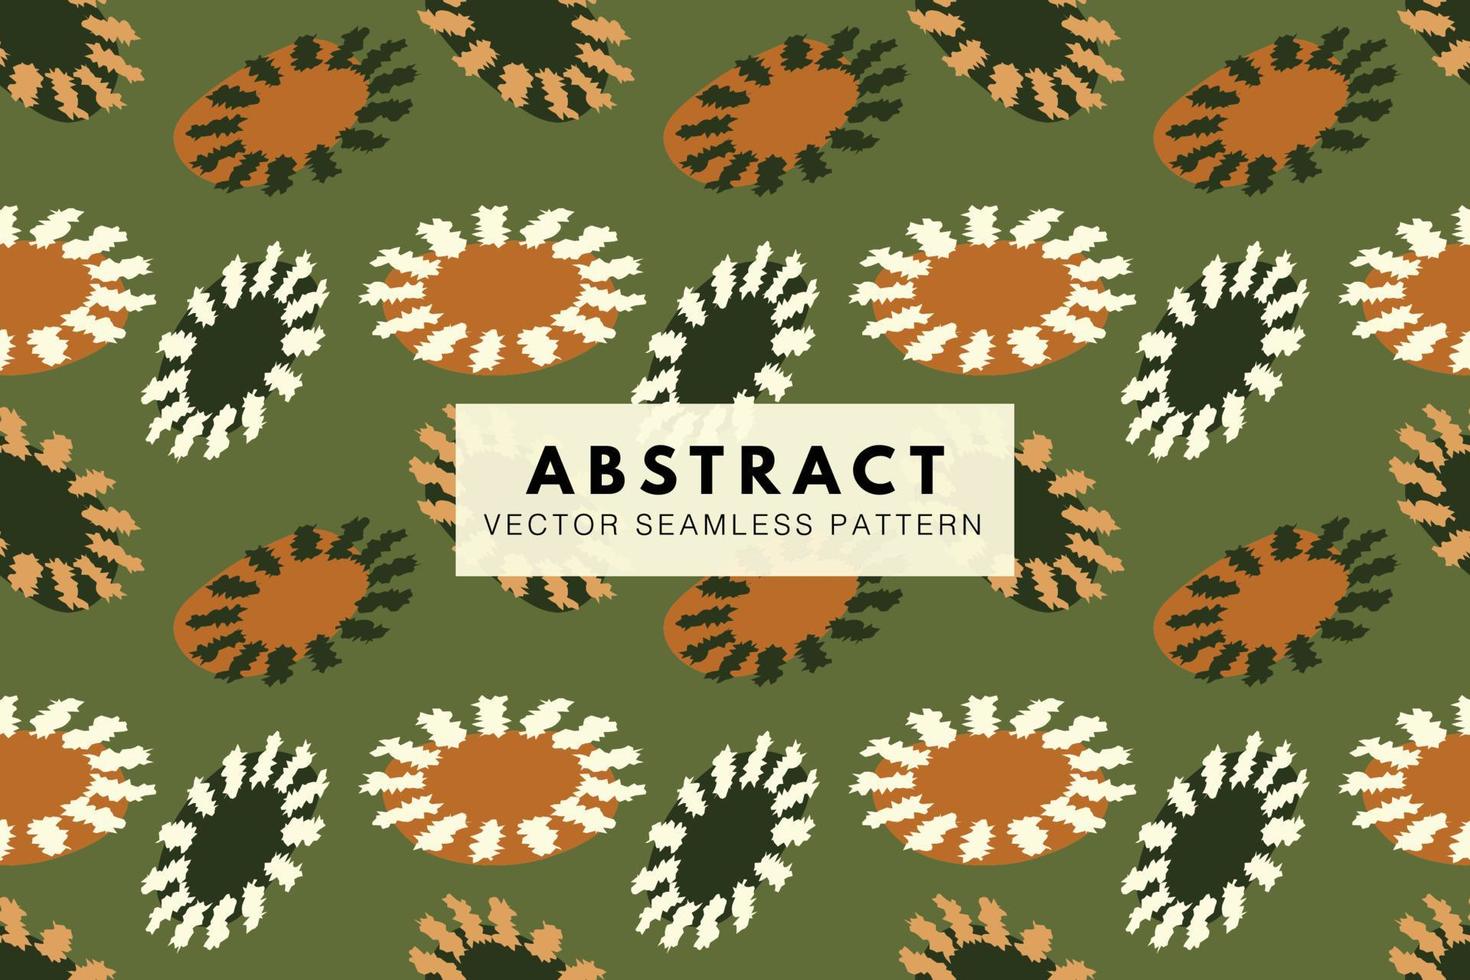 Oganic floral shapes abstract seamless repeat vector pattern